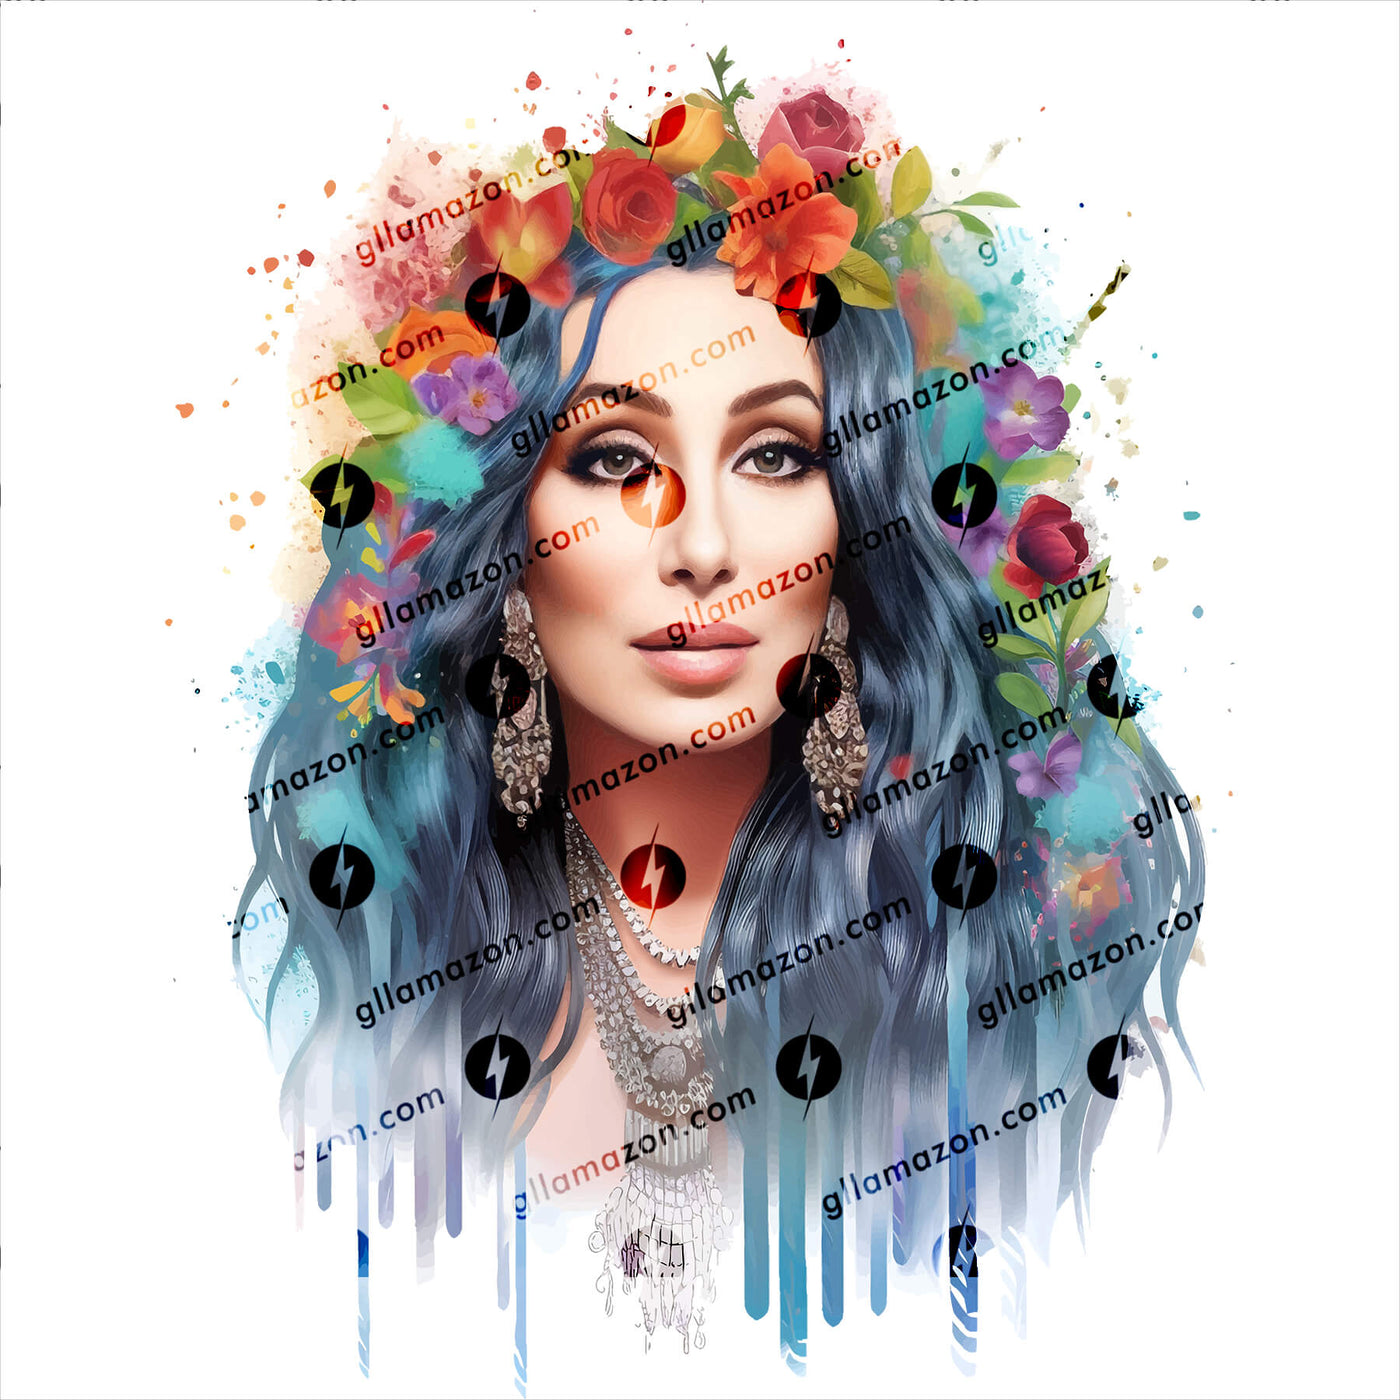 Preview of the design featured on Gllamazon's Cher-ry Blossom Cher T-shirt. Color: White.